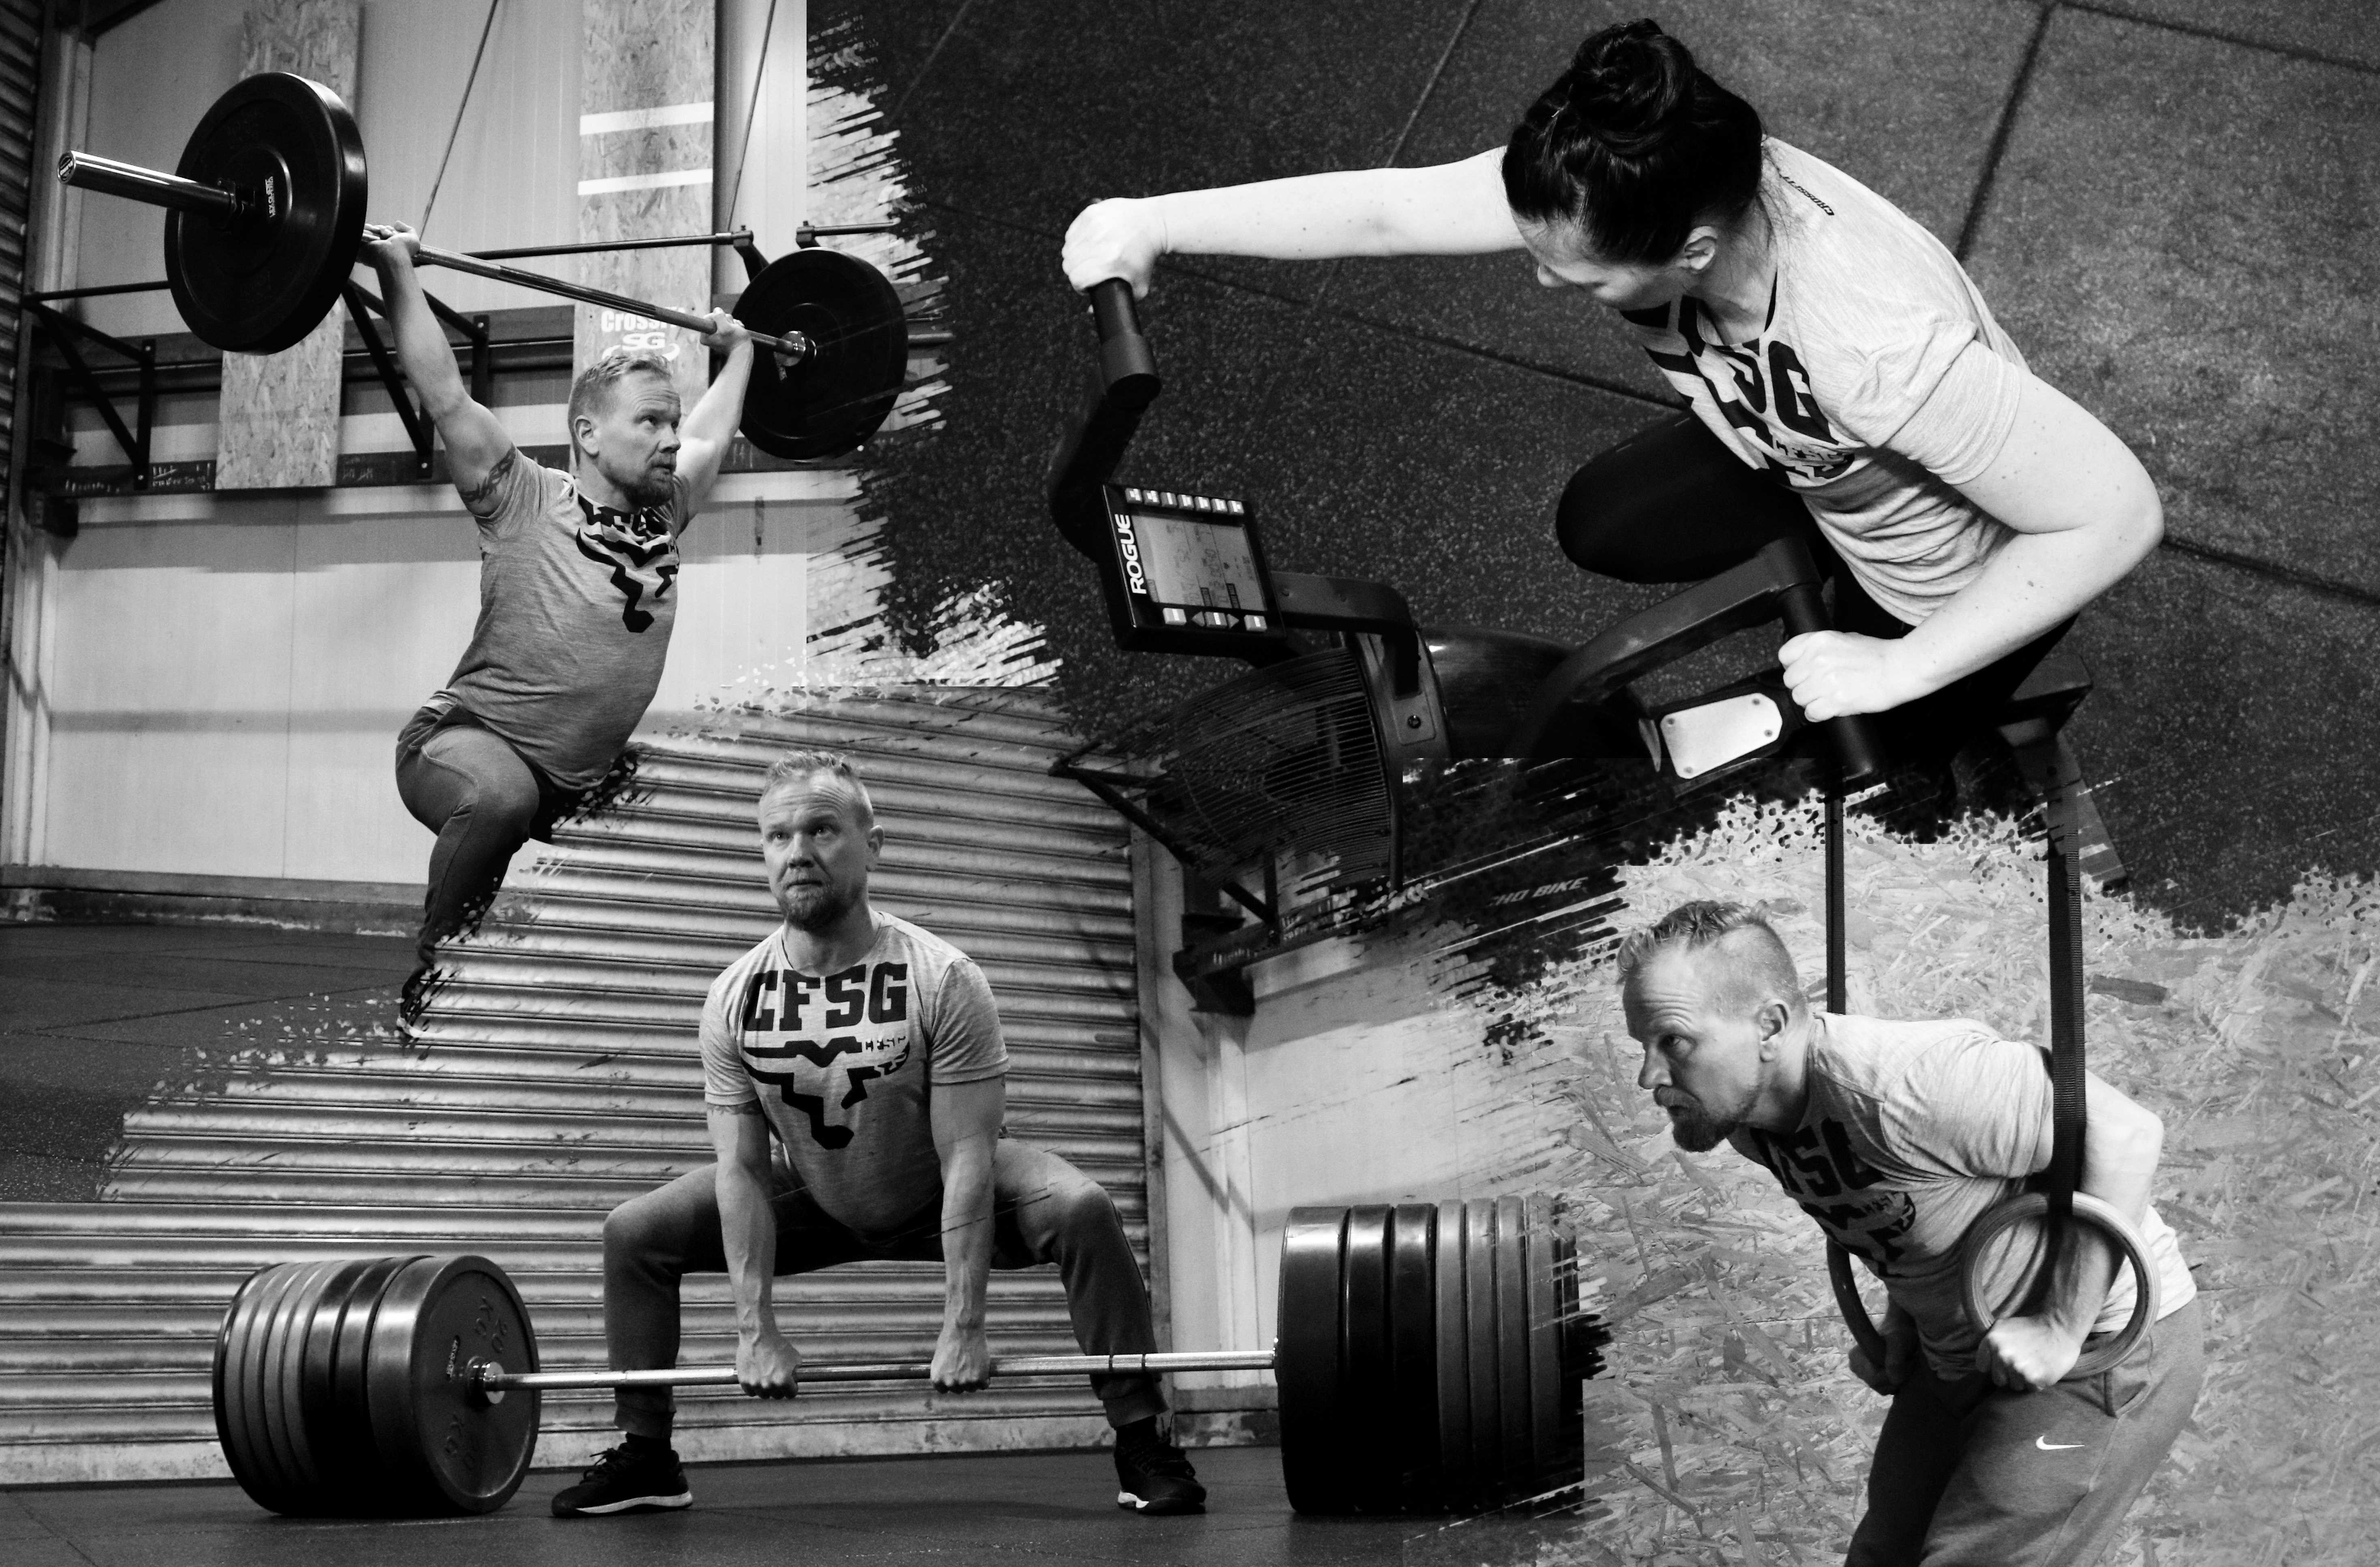 Crossfit SG in Hannover